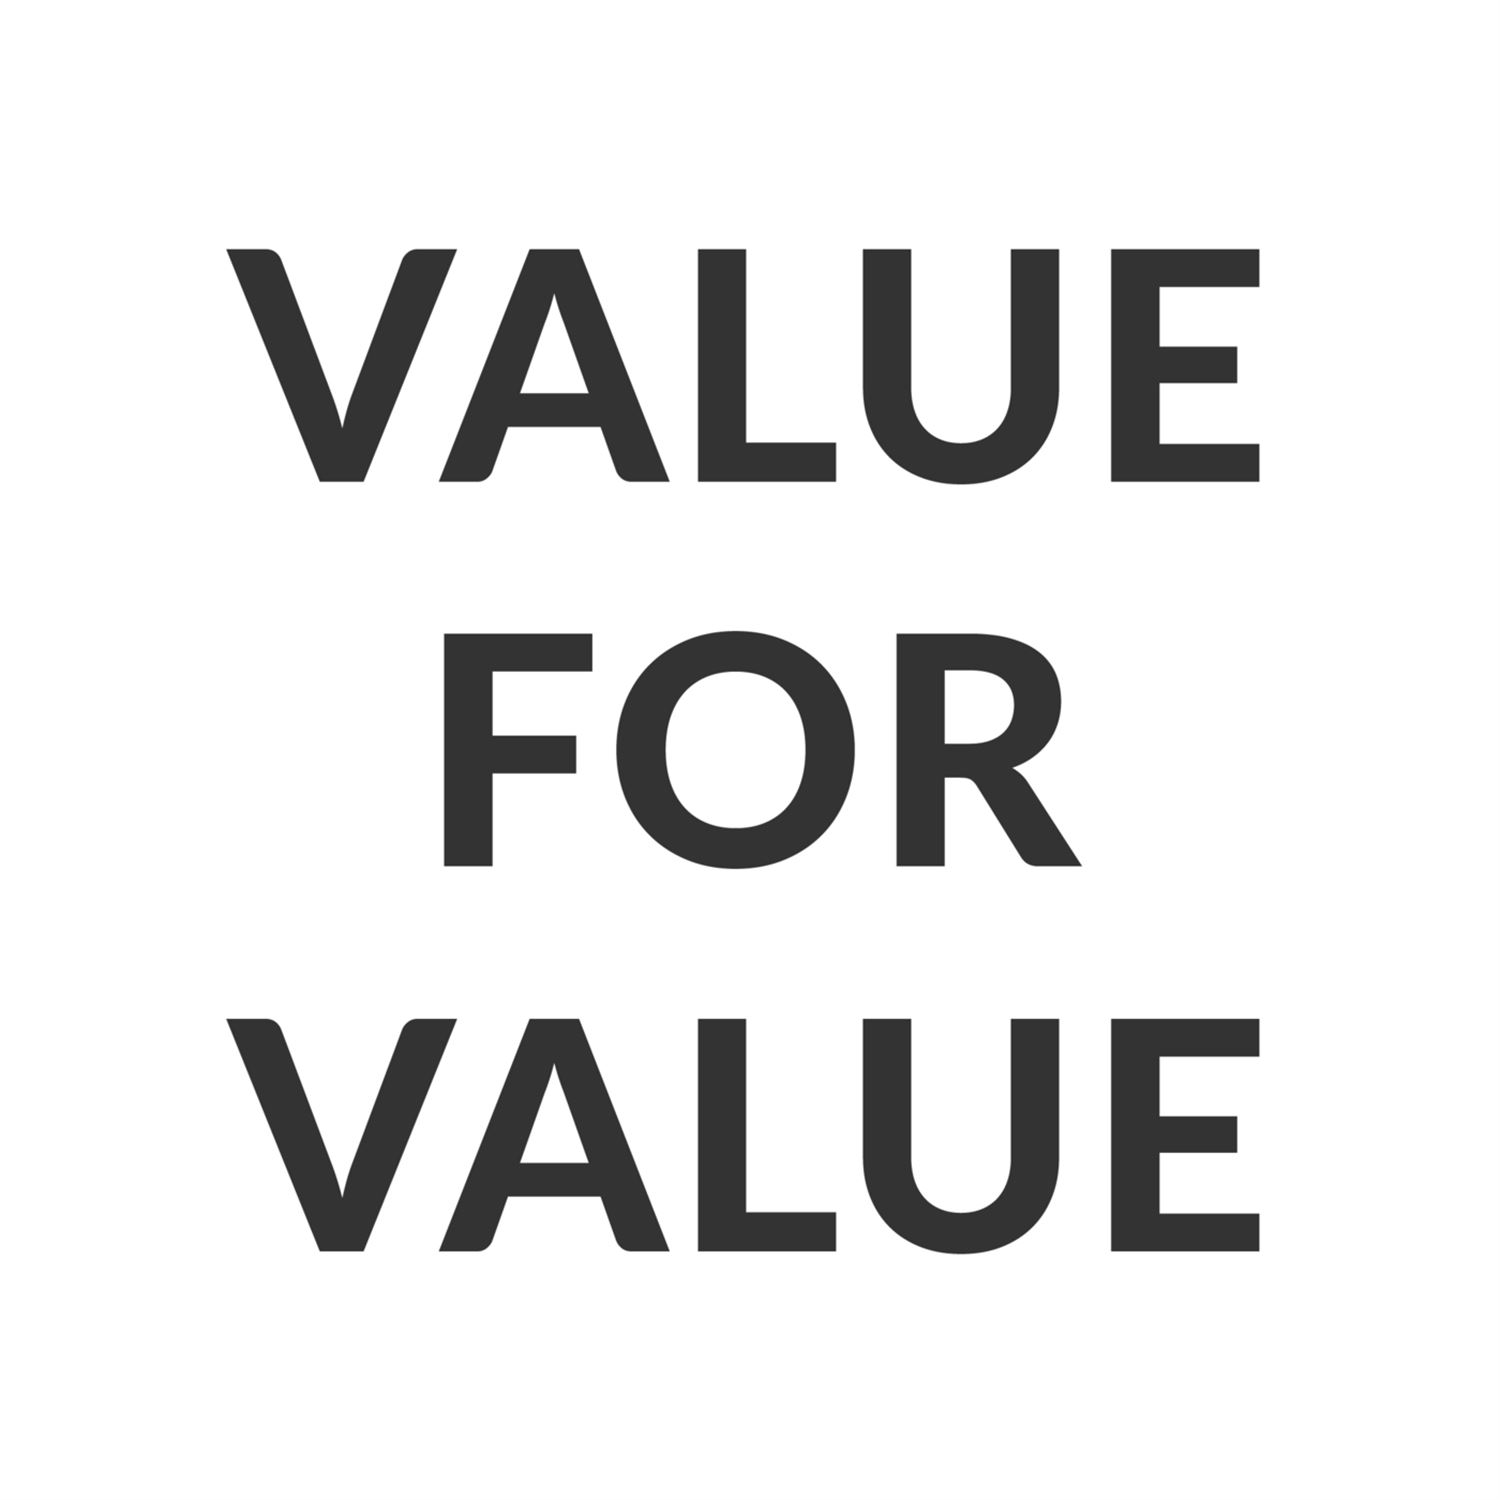 Why we do Value For Value